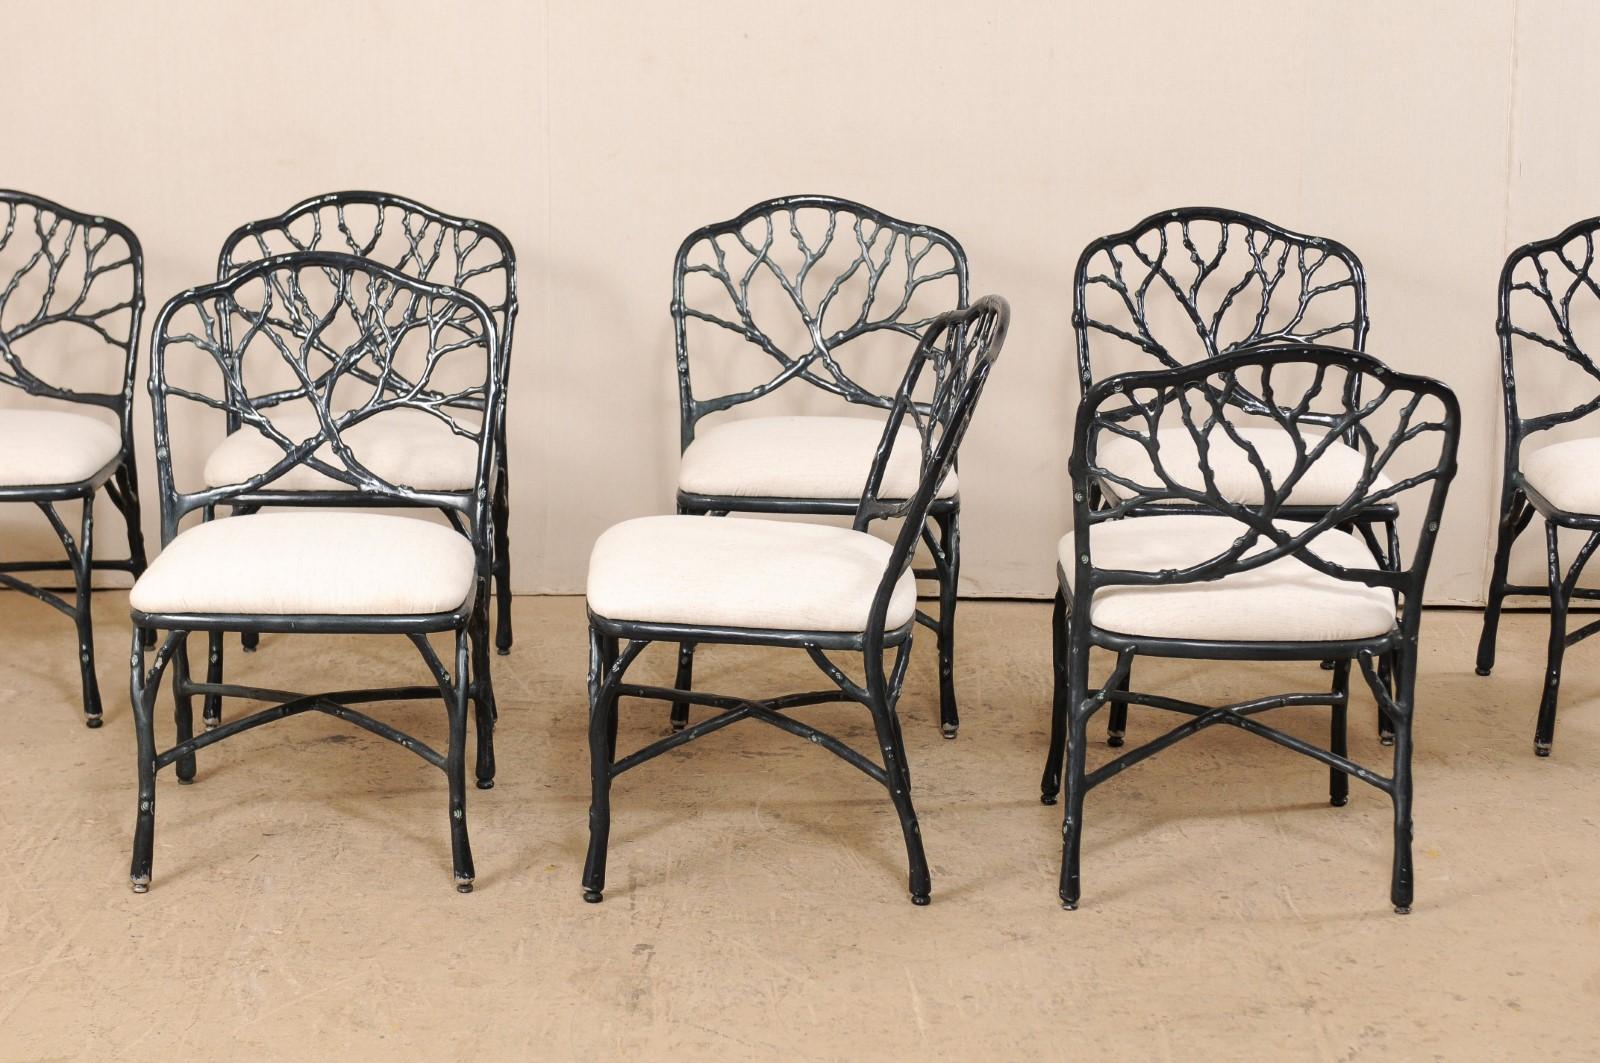 Aluminum Whimsical Set of Eight Twig & Branch Motif Vintage American Patio Dining Chairs